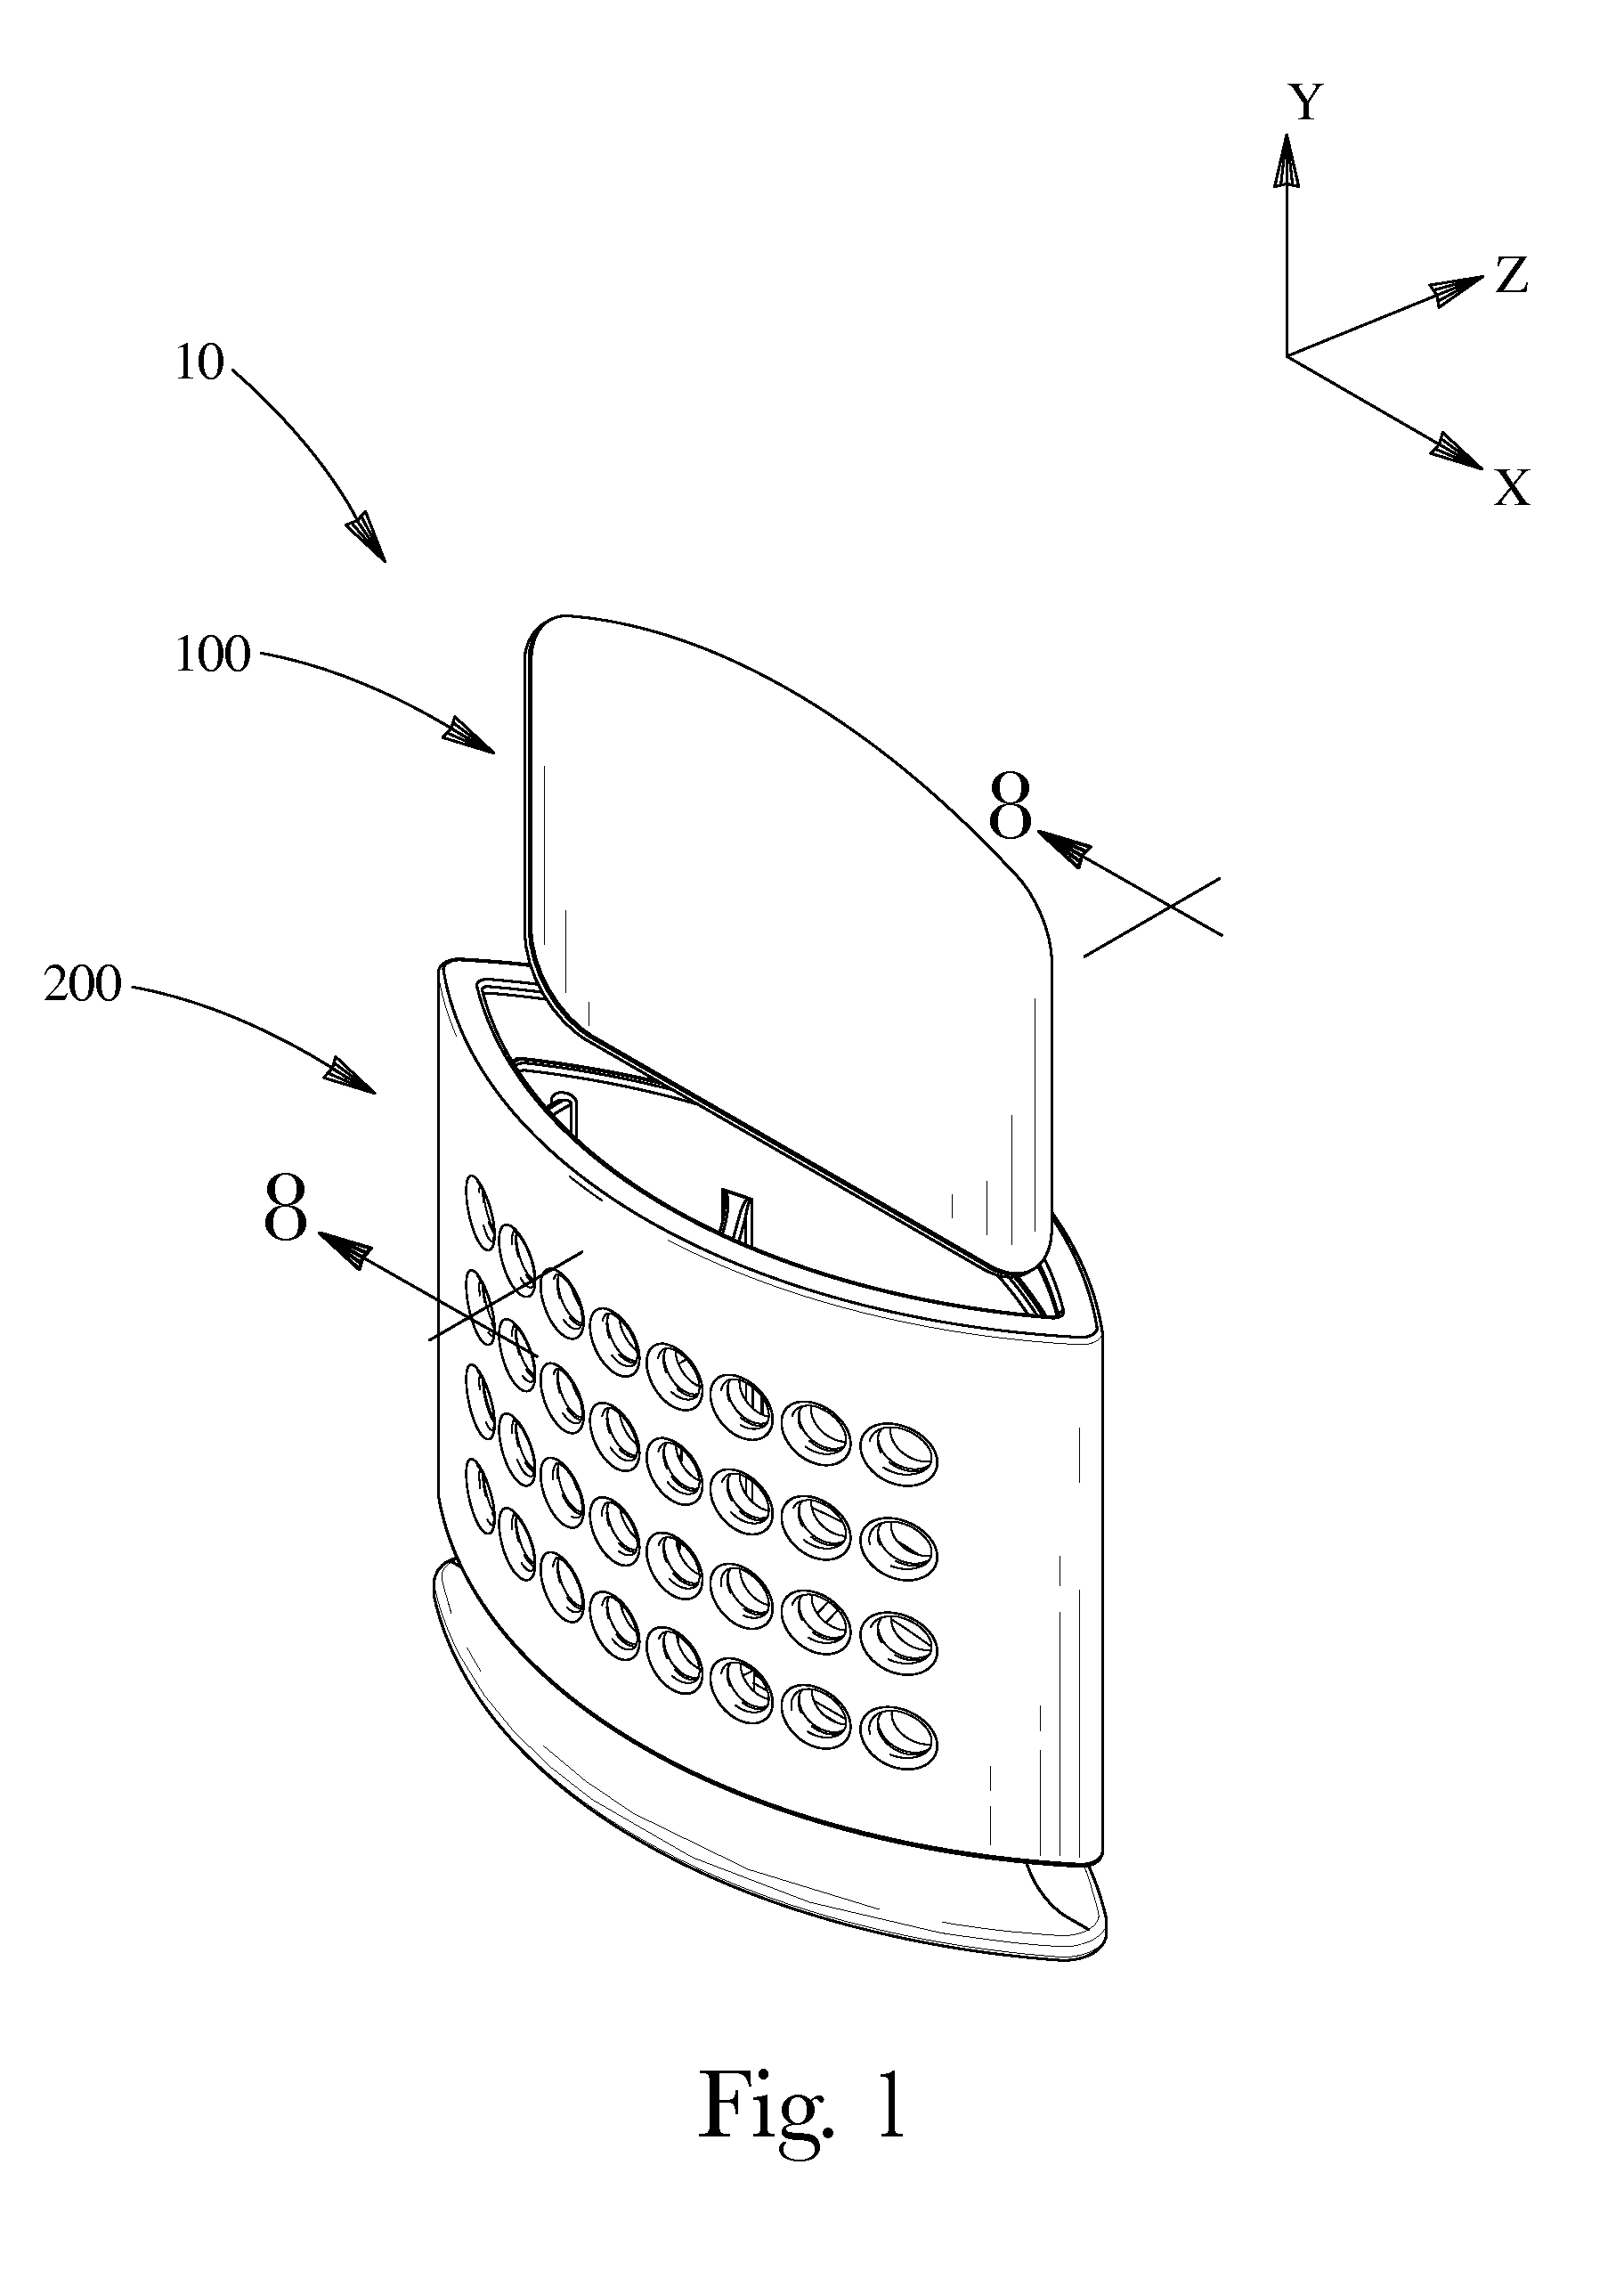 Apparatus for delivering a volatile material